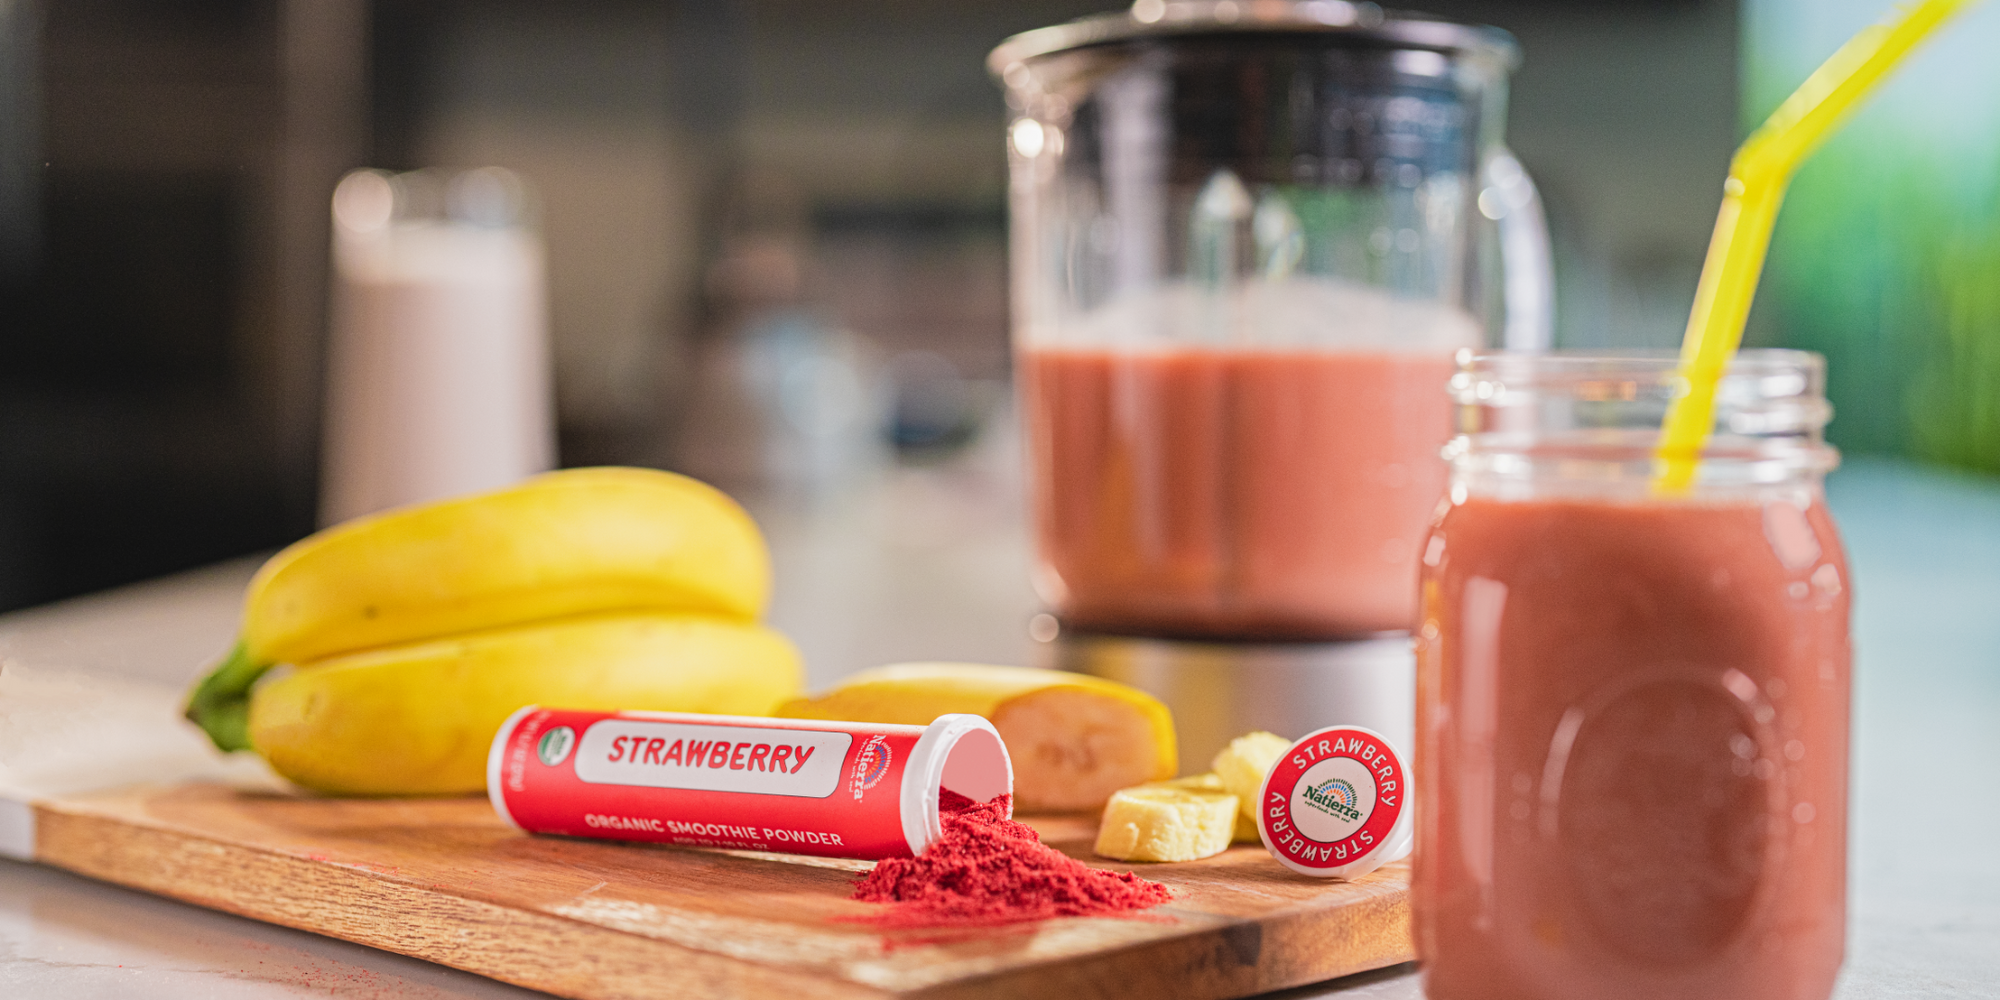 Natierra Organic Strawberry smoothie tube spilled in a wood cutting board, with smoothie in mason jar and Bananas in the background